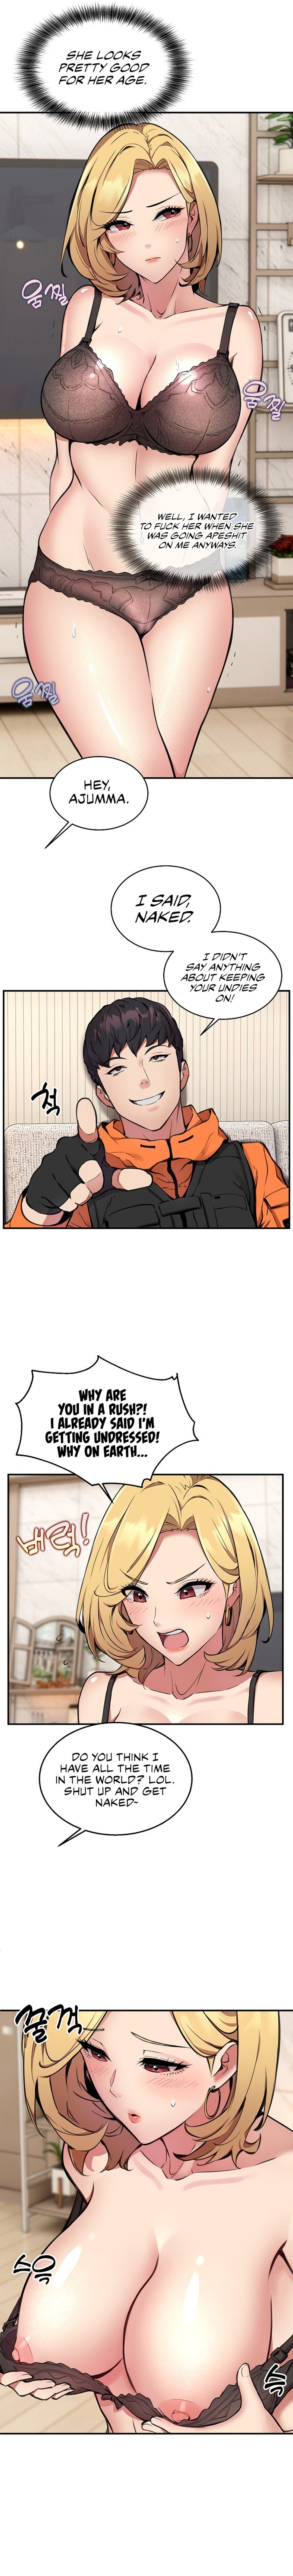 driver-in-the-new-city-chap-3-3